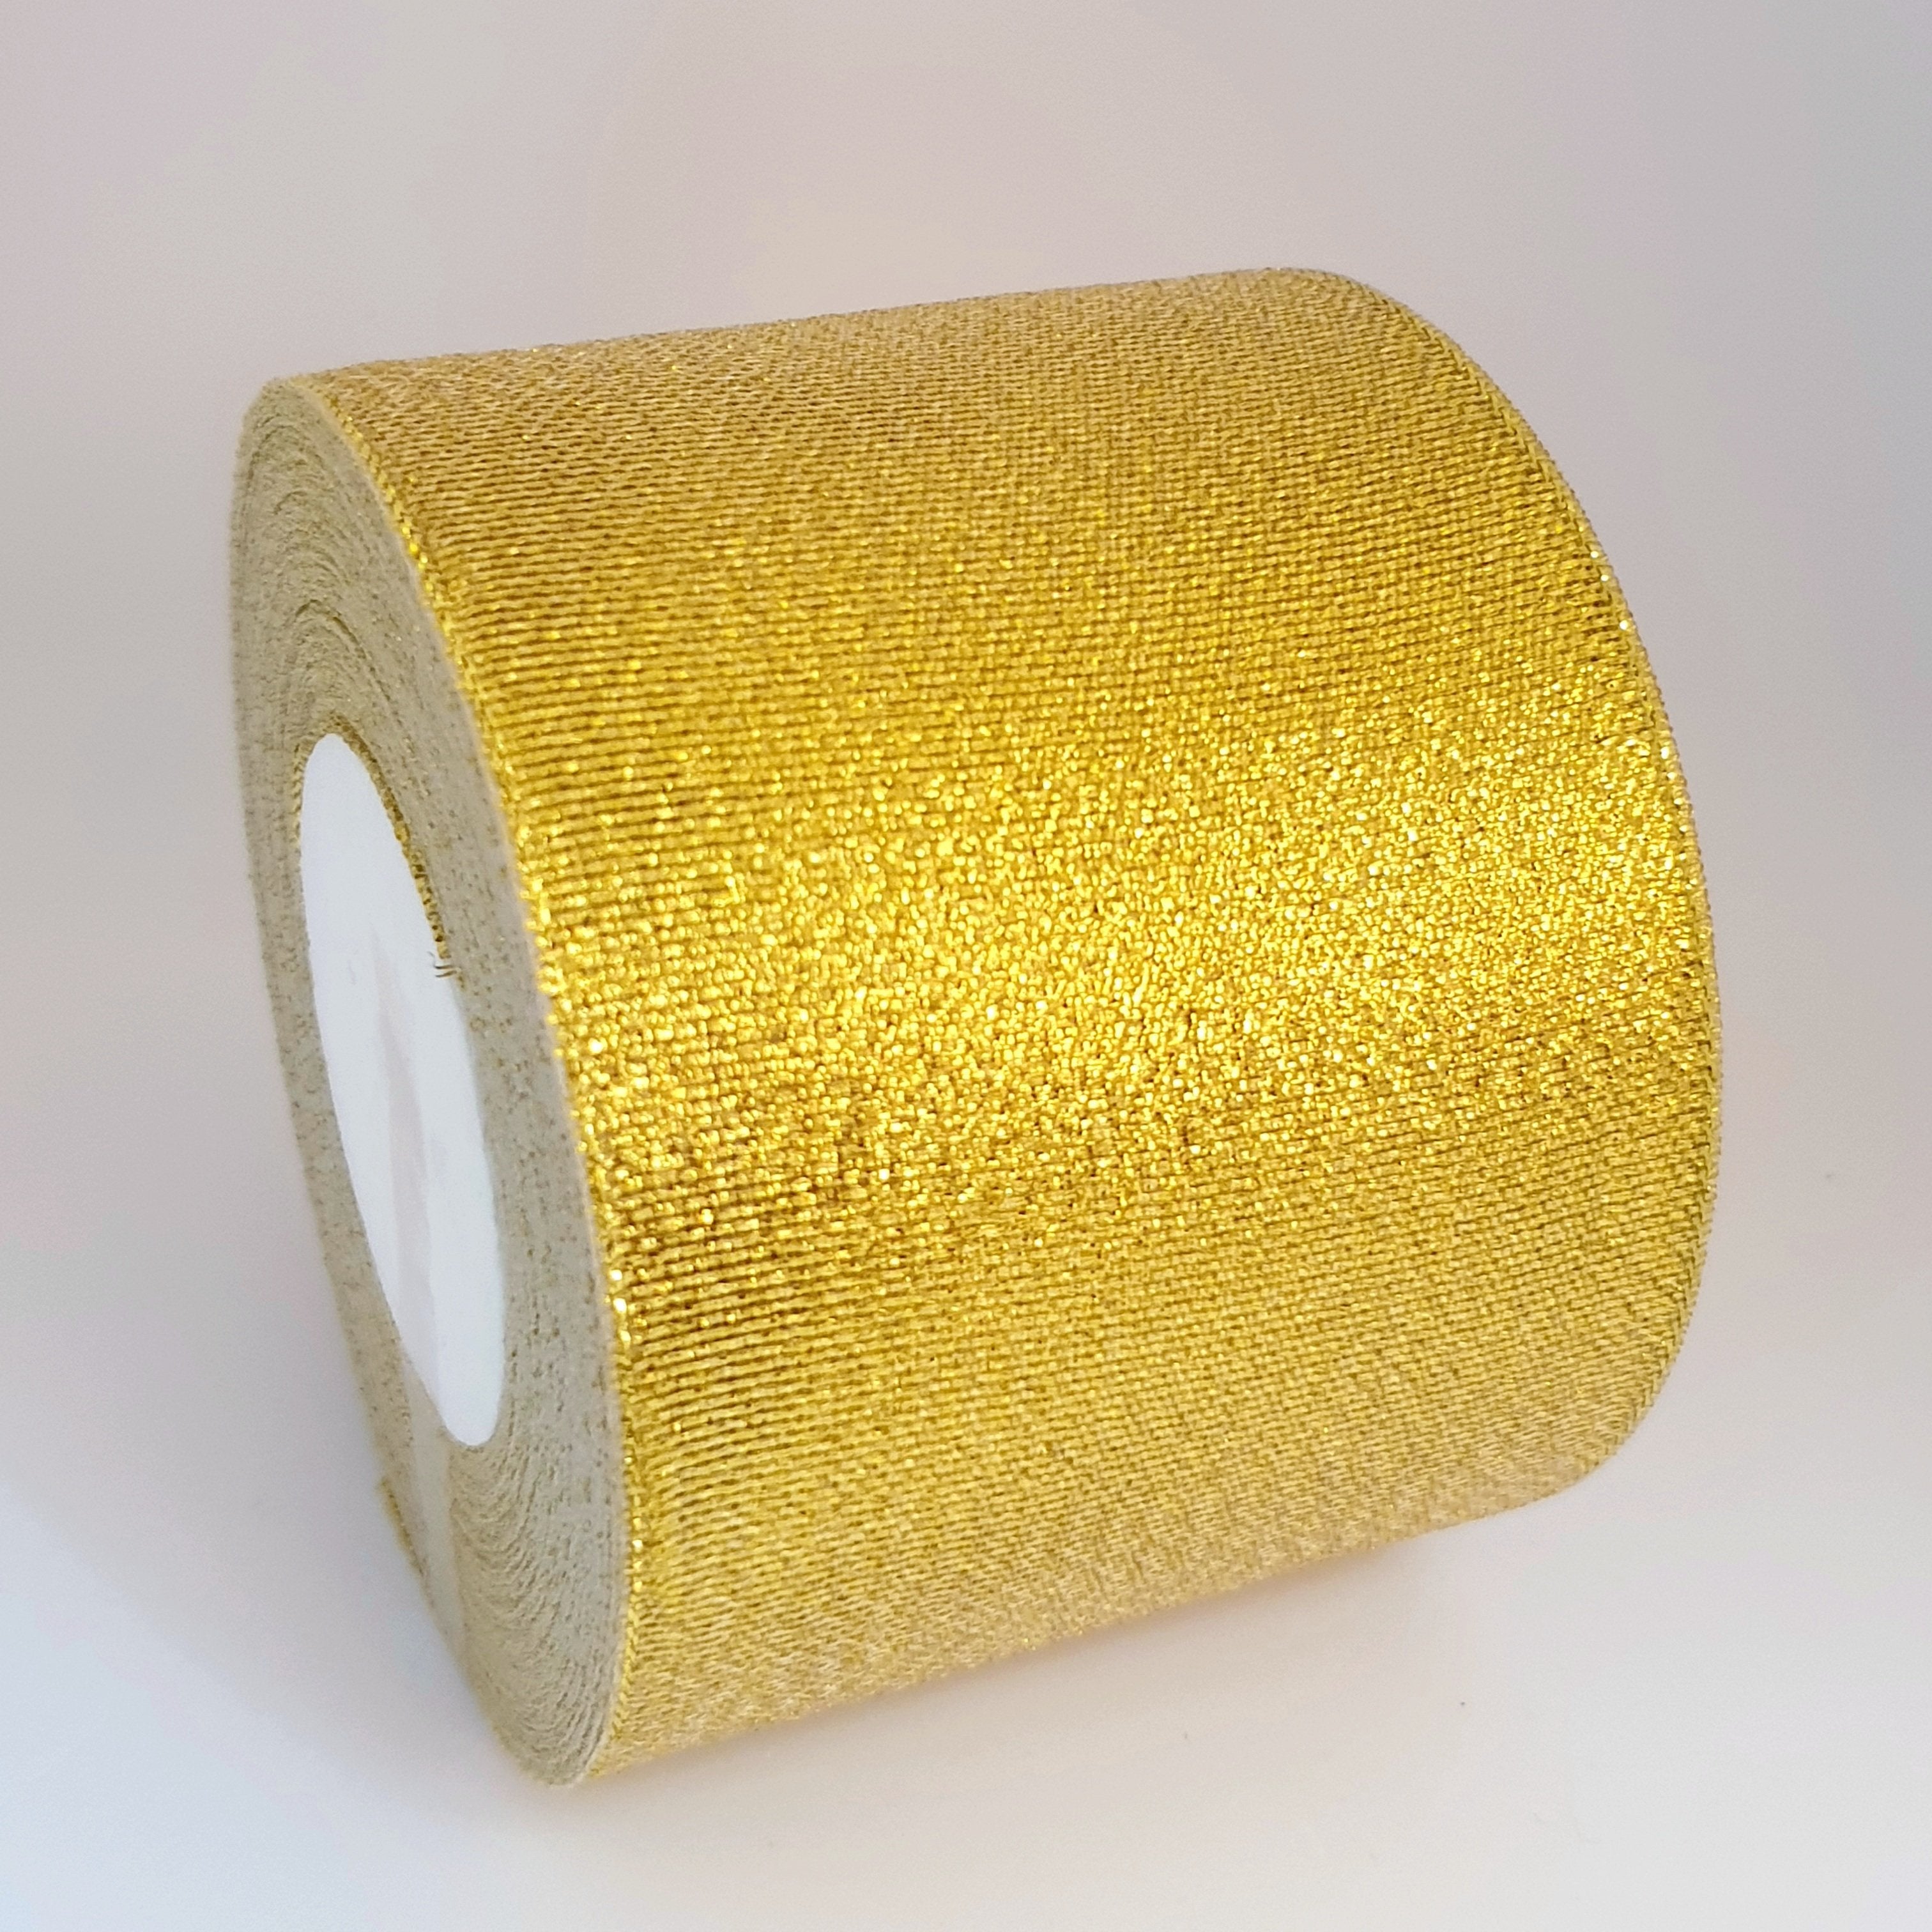 MajorCrafts 10cm wide 22metres Gold Shimmer Glitter Single Sided Sheer Organza Fabric Ribbon Roll